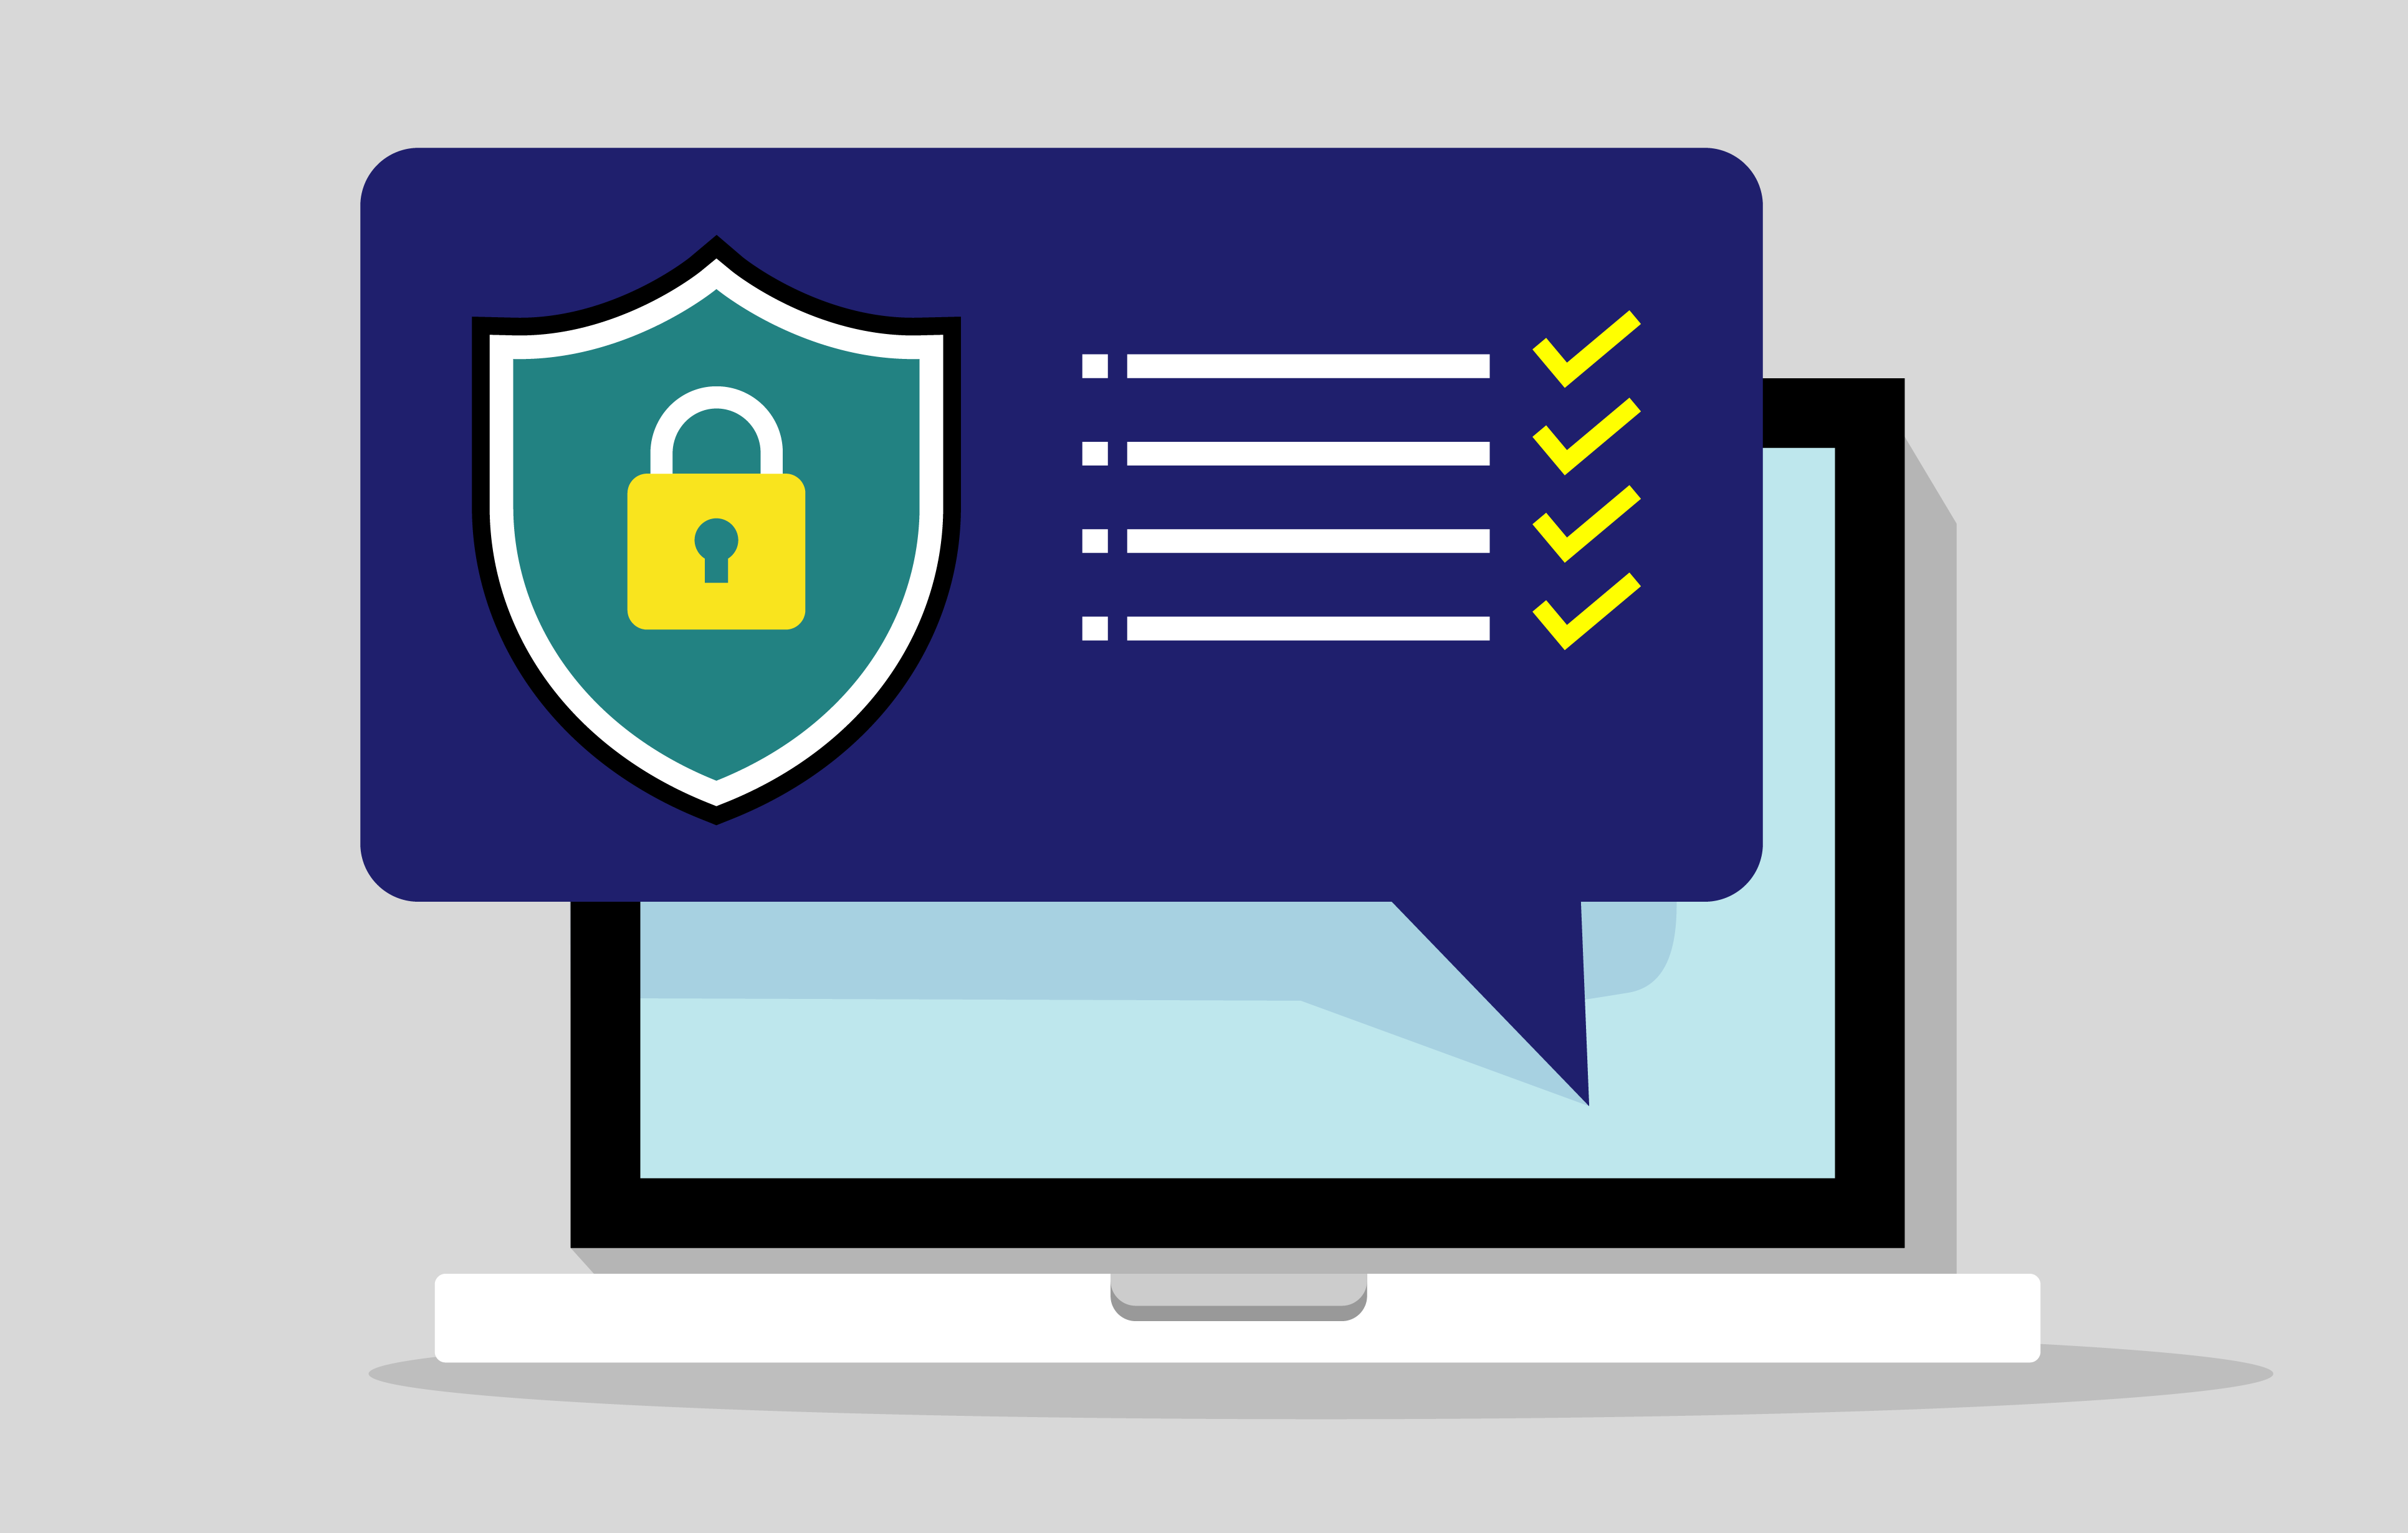 Data Security — A Note On Standards And Certifications